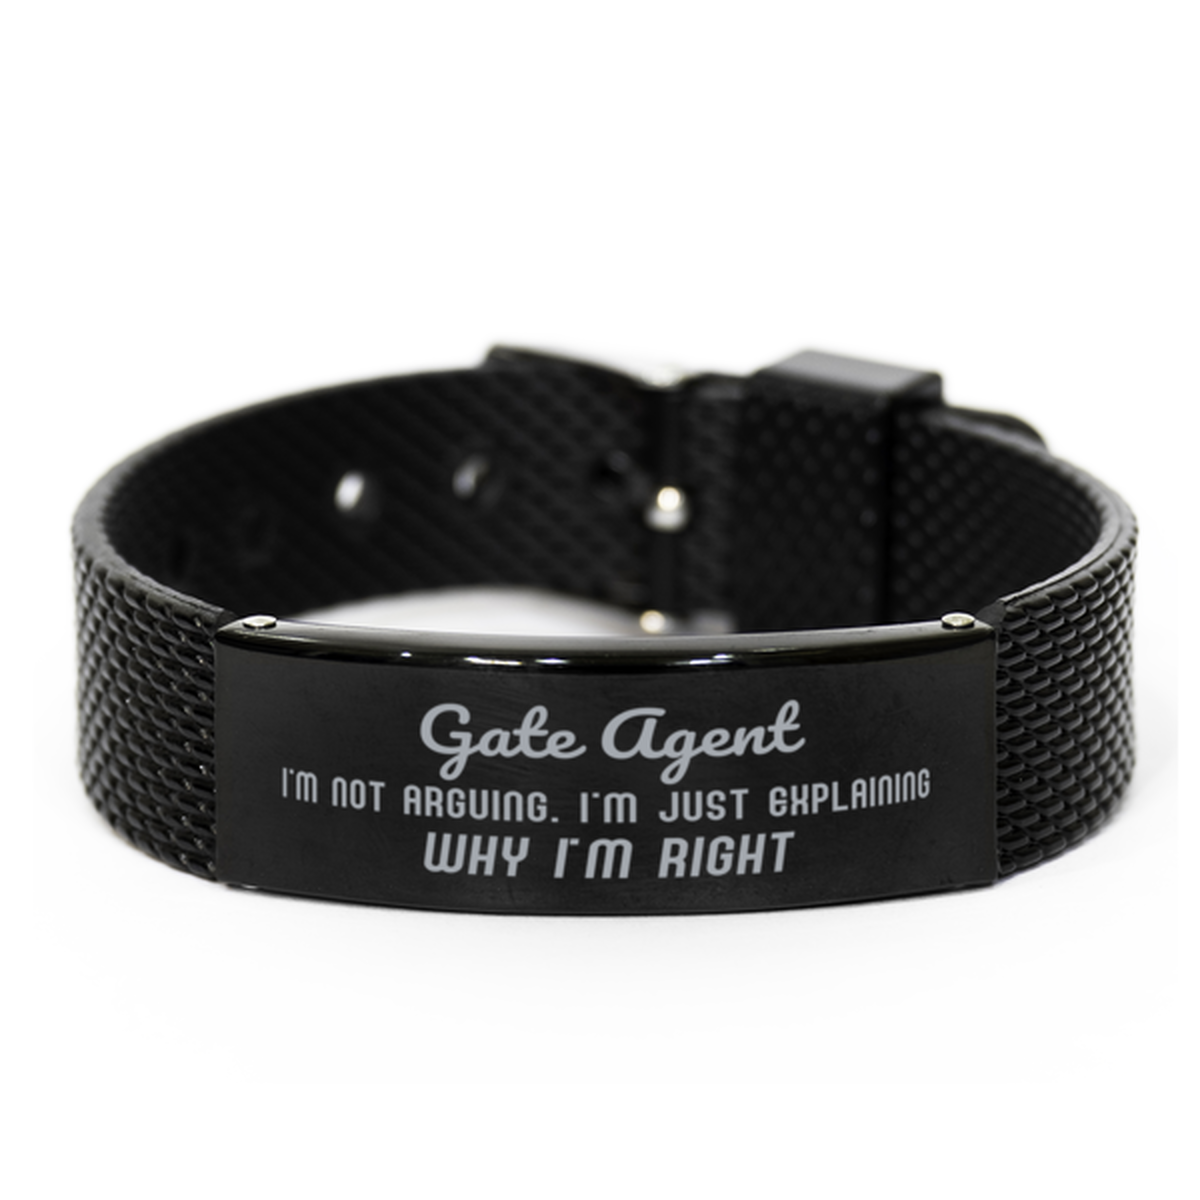 Gate Agent I'm not Arguing. I'm Just Explaining Why I'm RIGHT Black Shark Mesh Bracelet, Funny Saying Quote Gate Agent Gifts For Gate Agent Graduation Birthday Christmas Gifts for Men Women Coworker